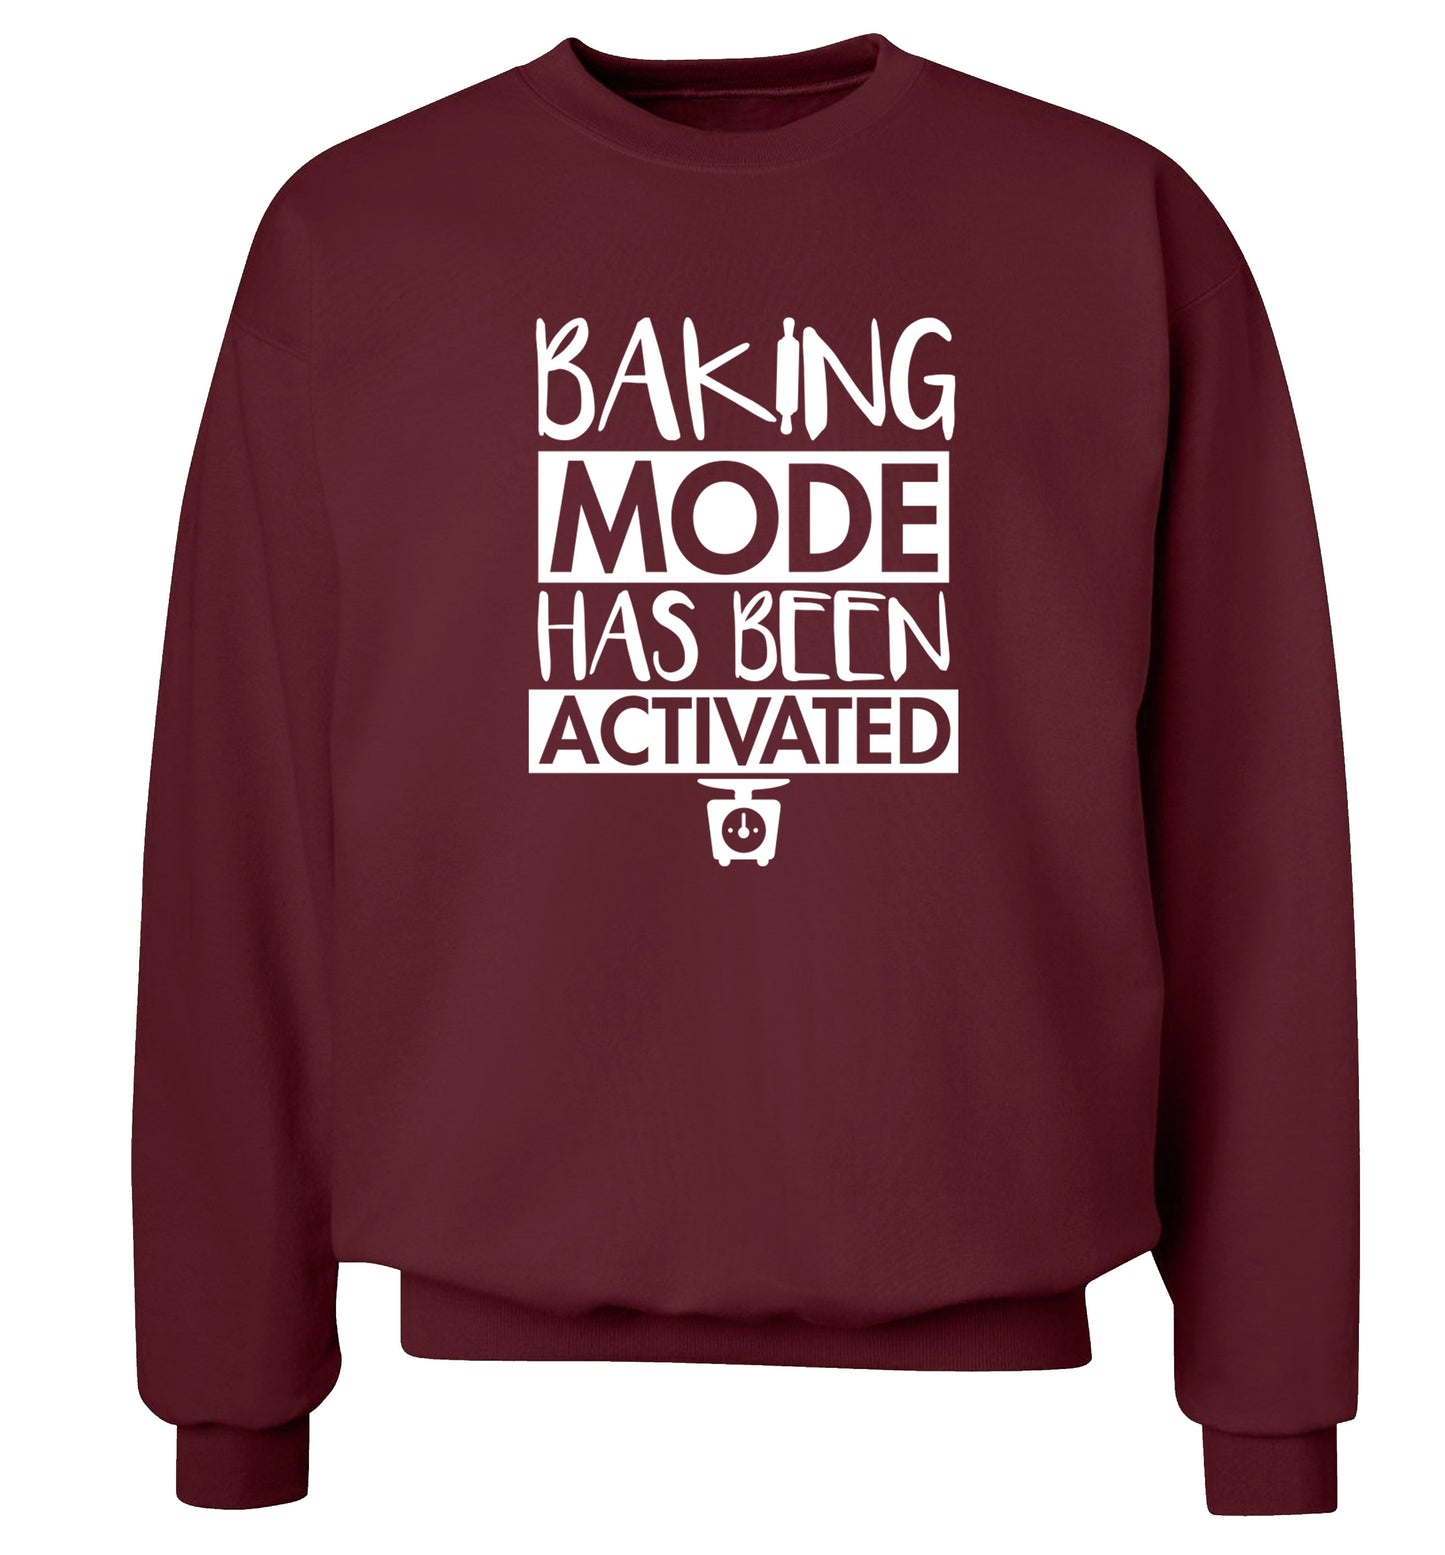 Baking mode has been activated Adult's unisex maroon Sweater 2XL